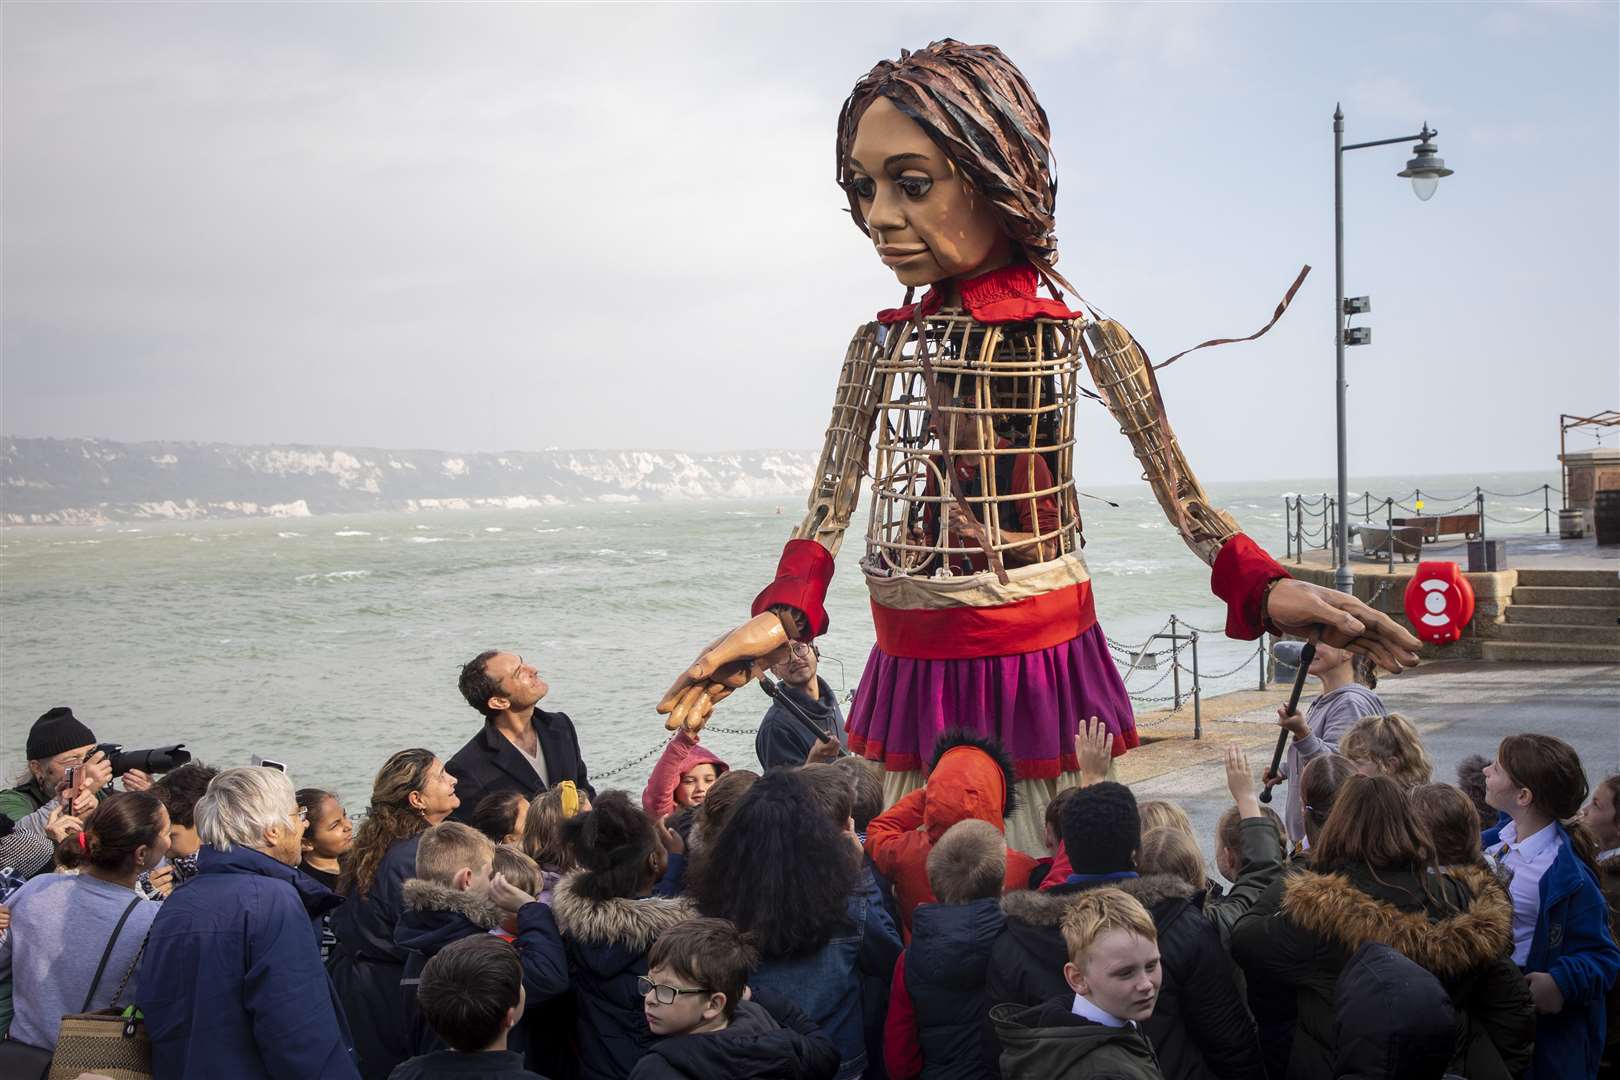 The puppet was also welcomed by school children. Photo by Andy Aitchison